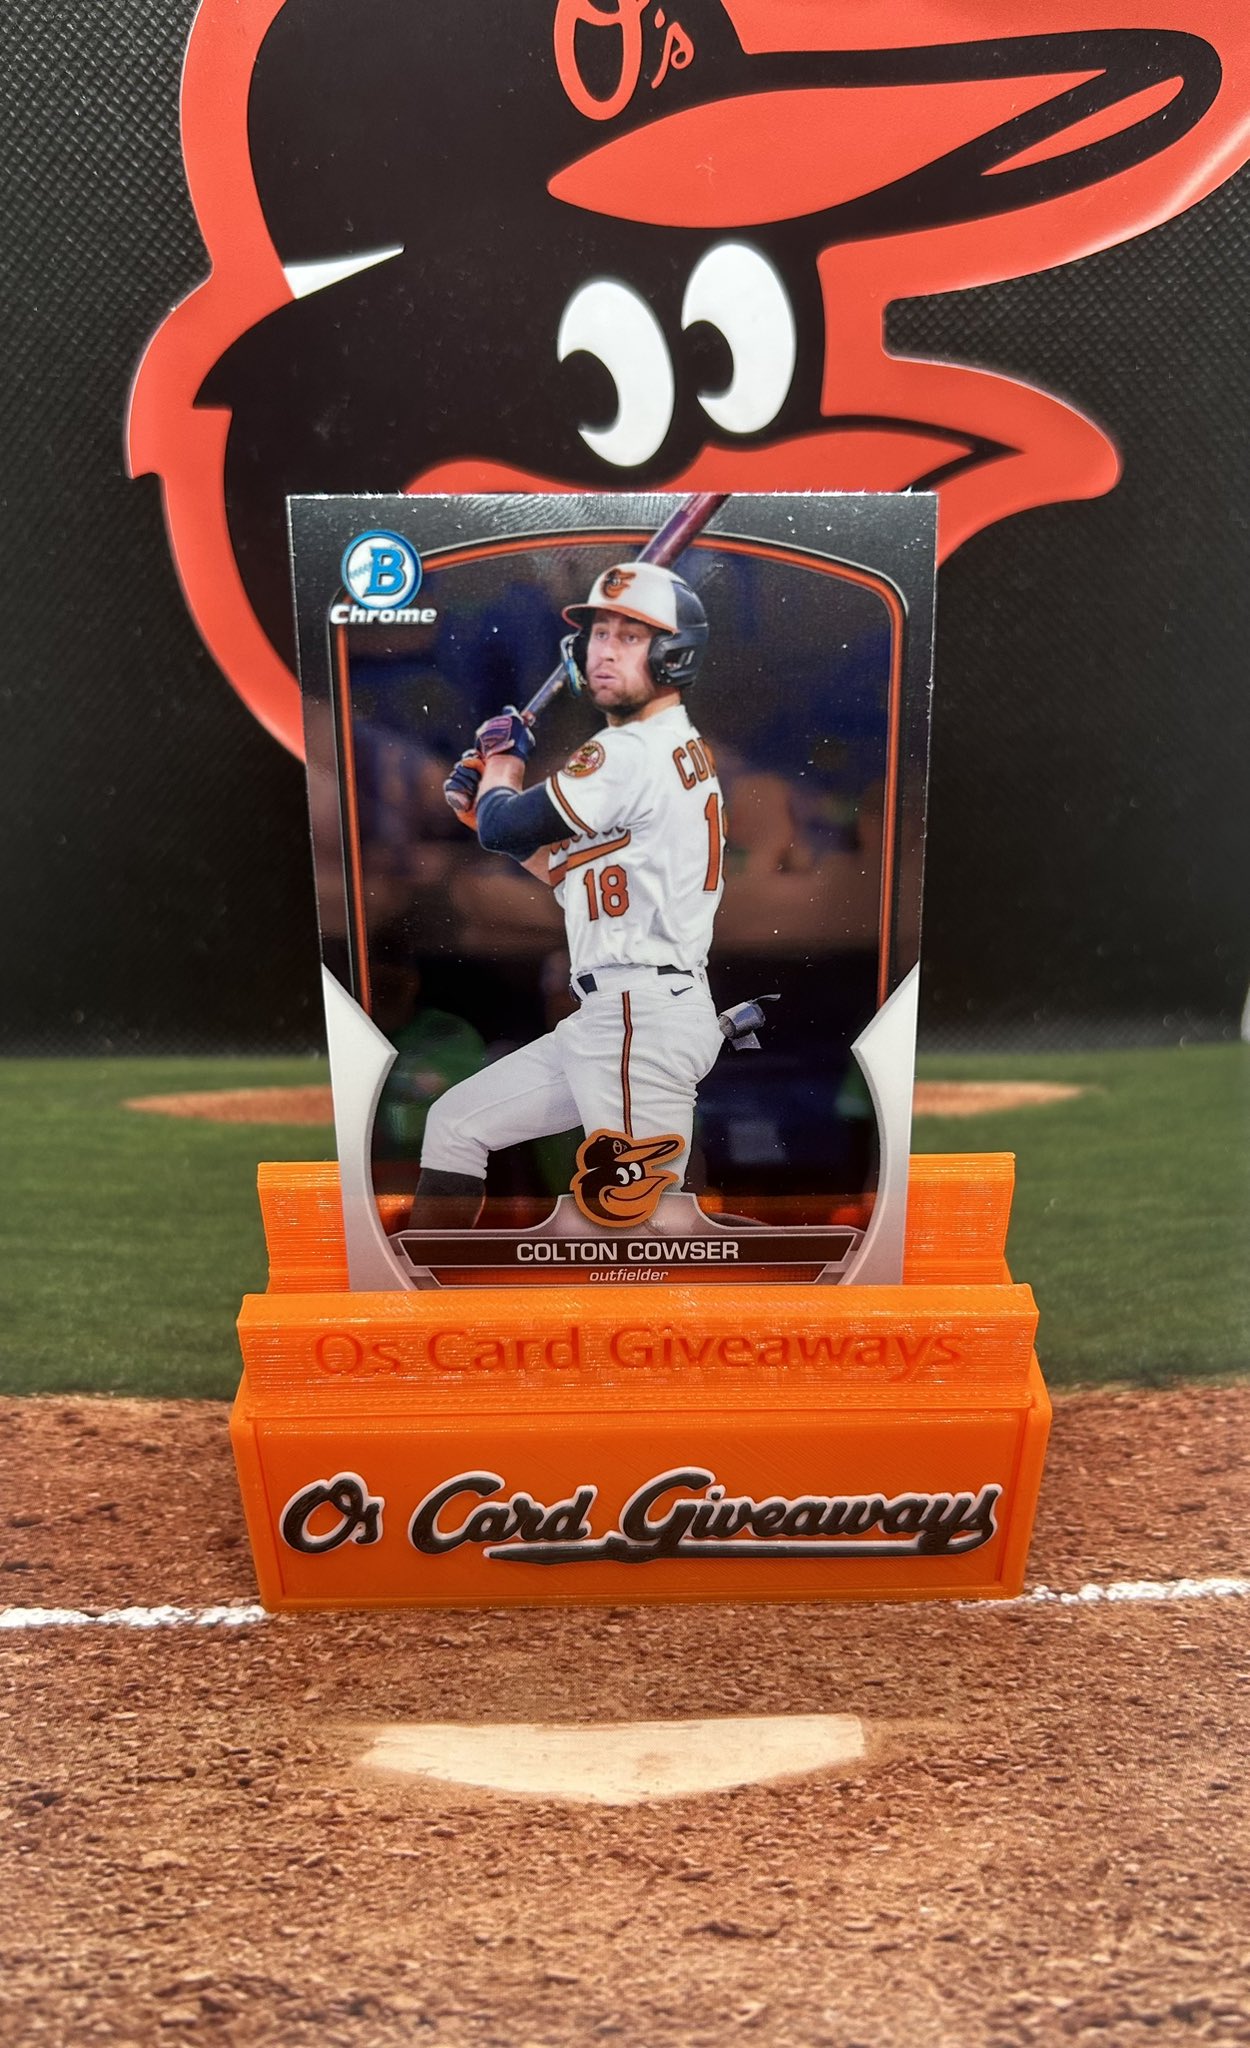 O's Baseball Card Giveaways on X: ORIOLES WIN!!!! 🐮 Colton Cowser with  the game winning RBI!! Like and retweet!!! I'll select 10 followers to  receive 1 of these Colton Cowser cards!!! #Birdland